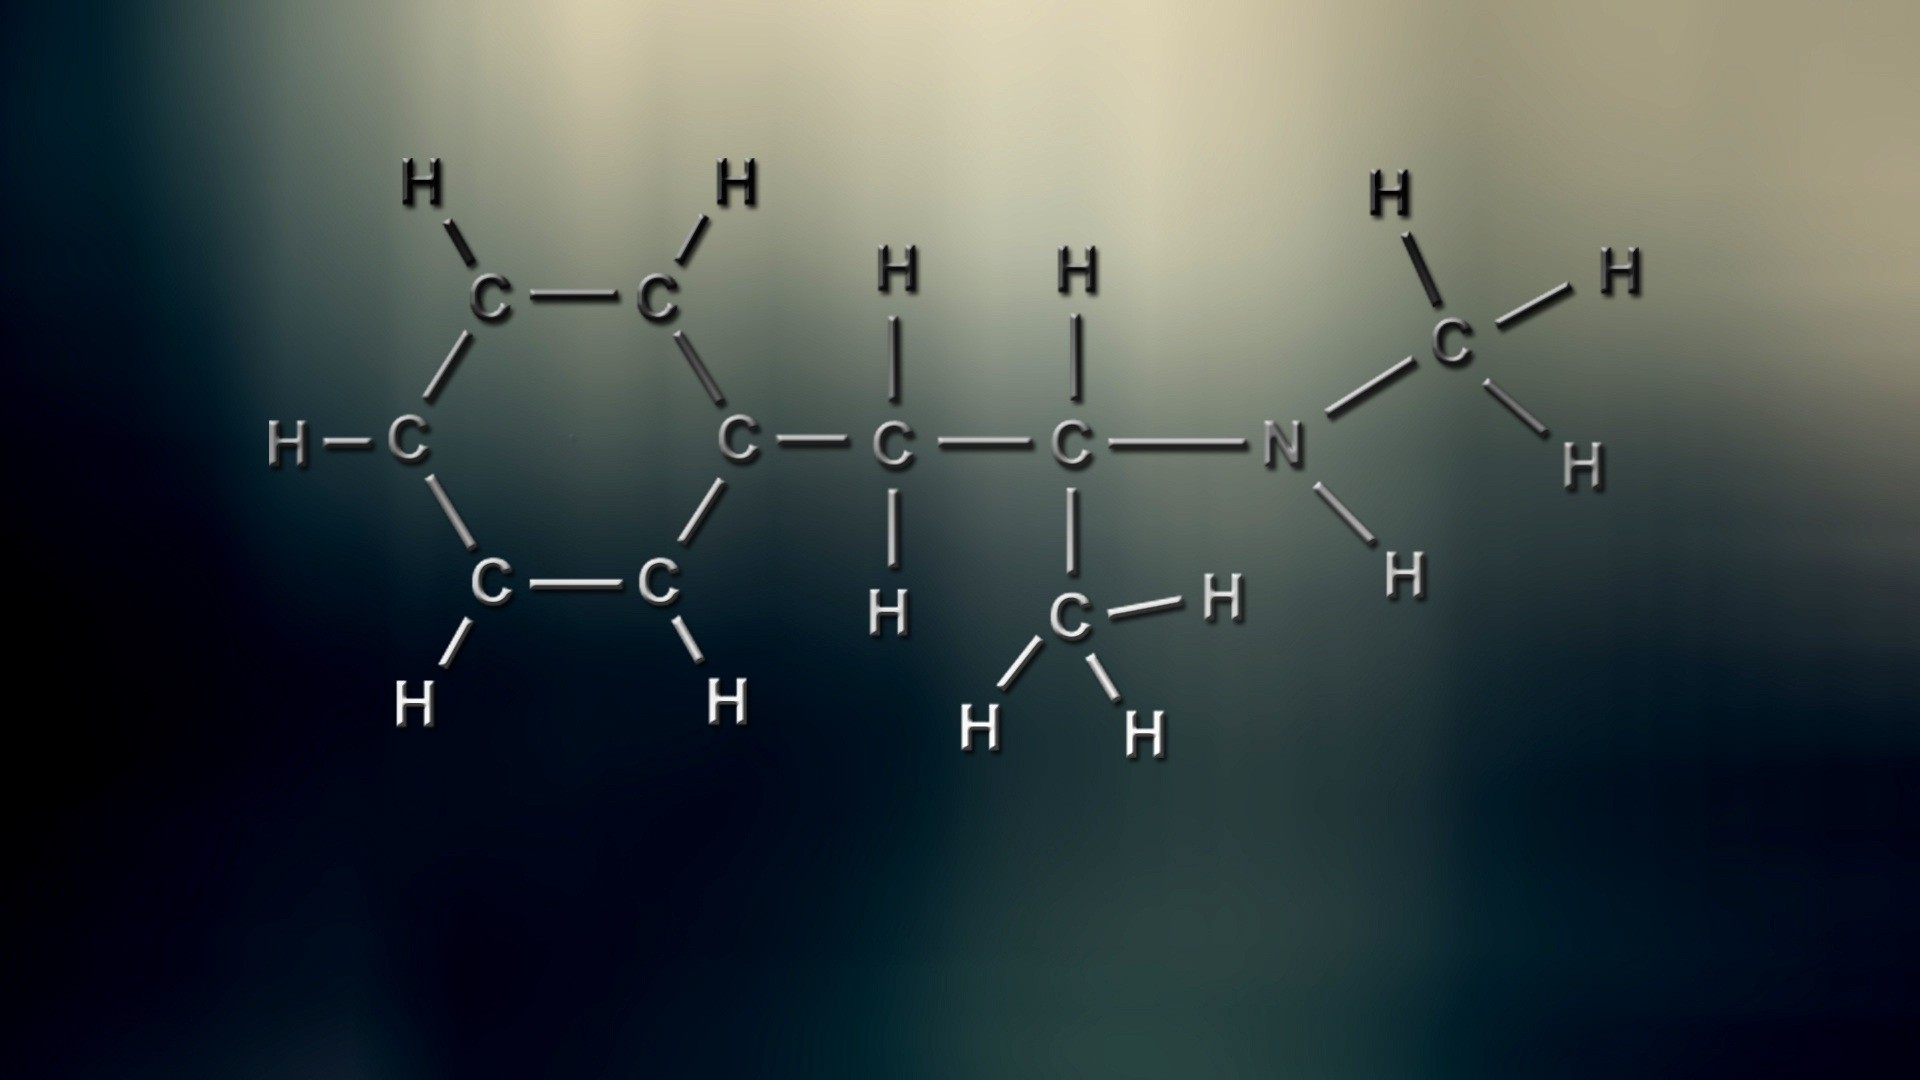 Chemistry Backgrounds Hd Drugs Hd Wallpapers , Science - Chemistry  Wallpaper Hd - 1920x1080 Wallpaper 